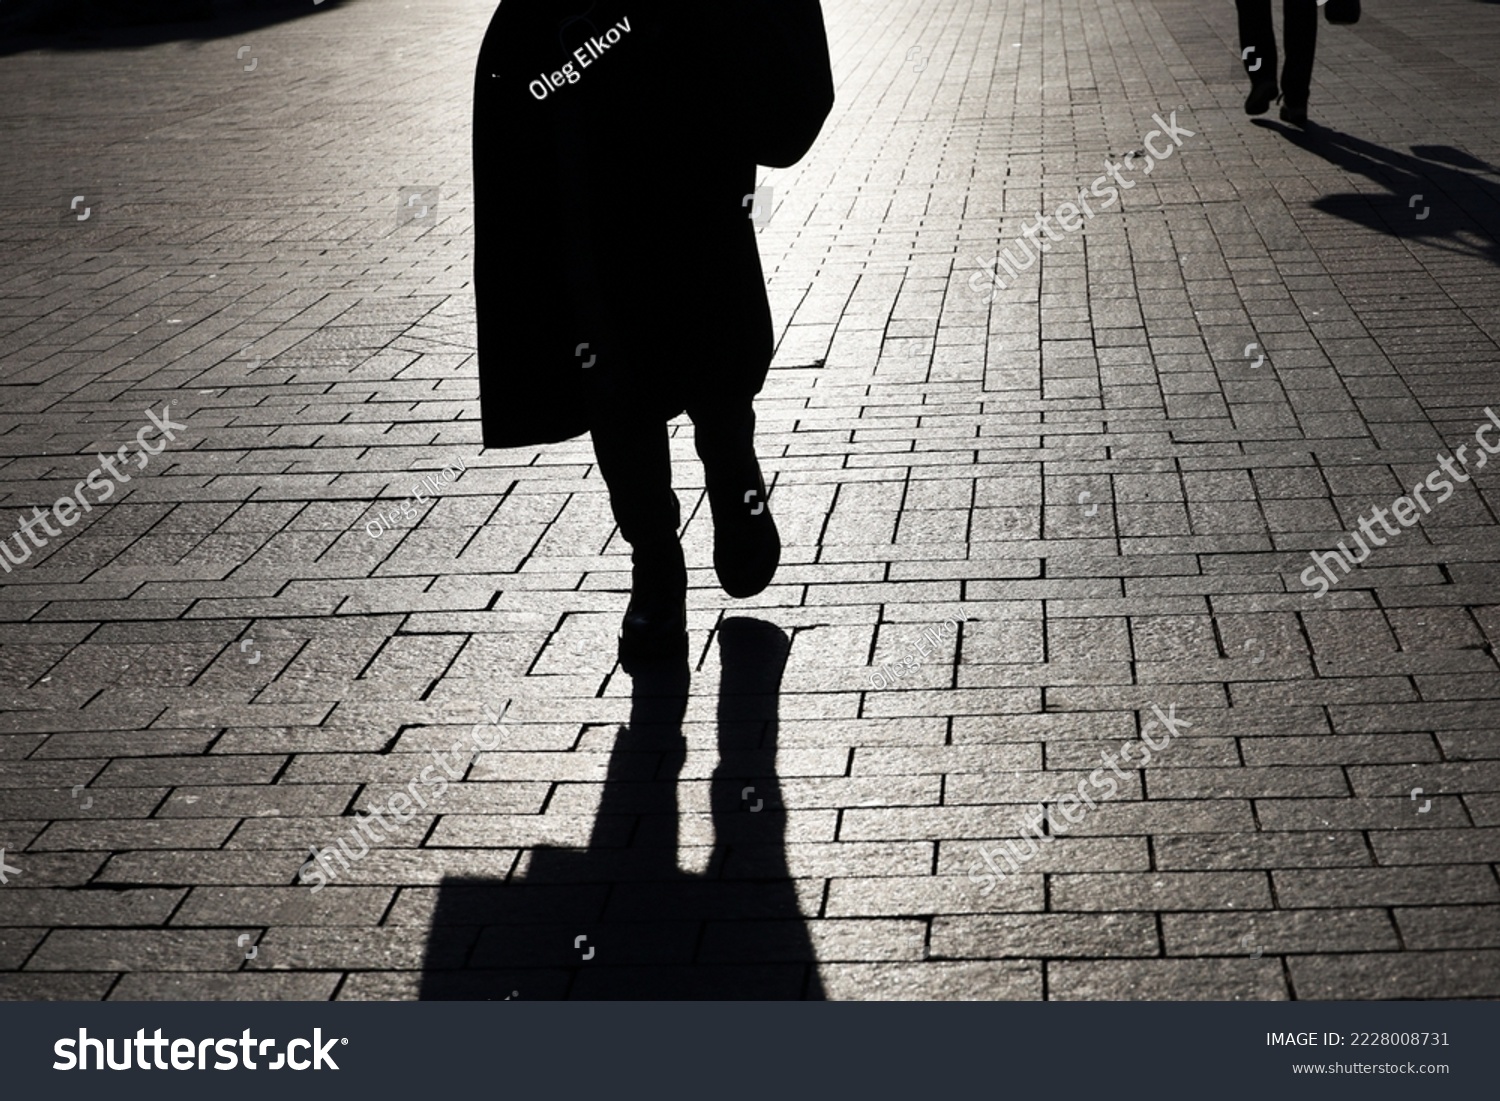 Black silhouette and shadow of lonely woman walking on a street and person on background. Female legs on paved city sidewalk #2228008731